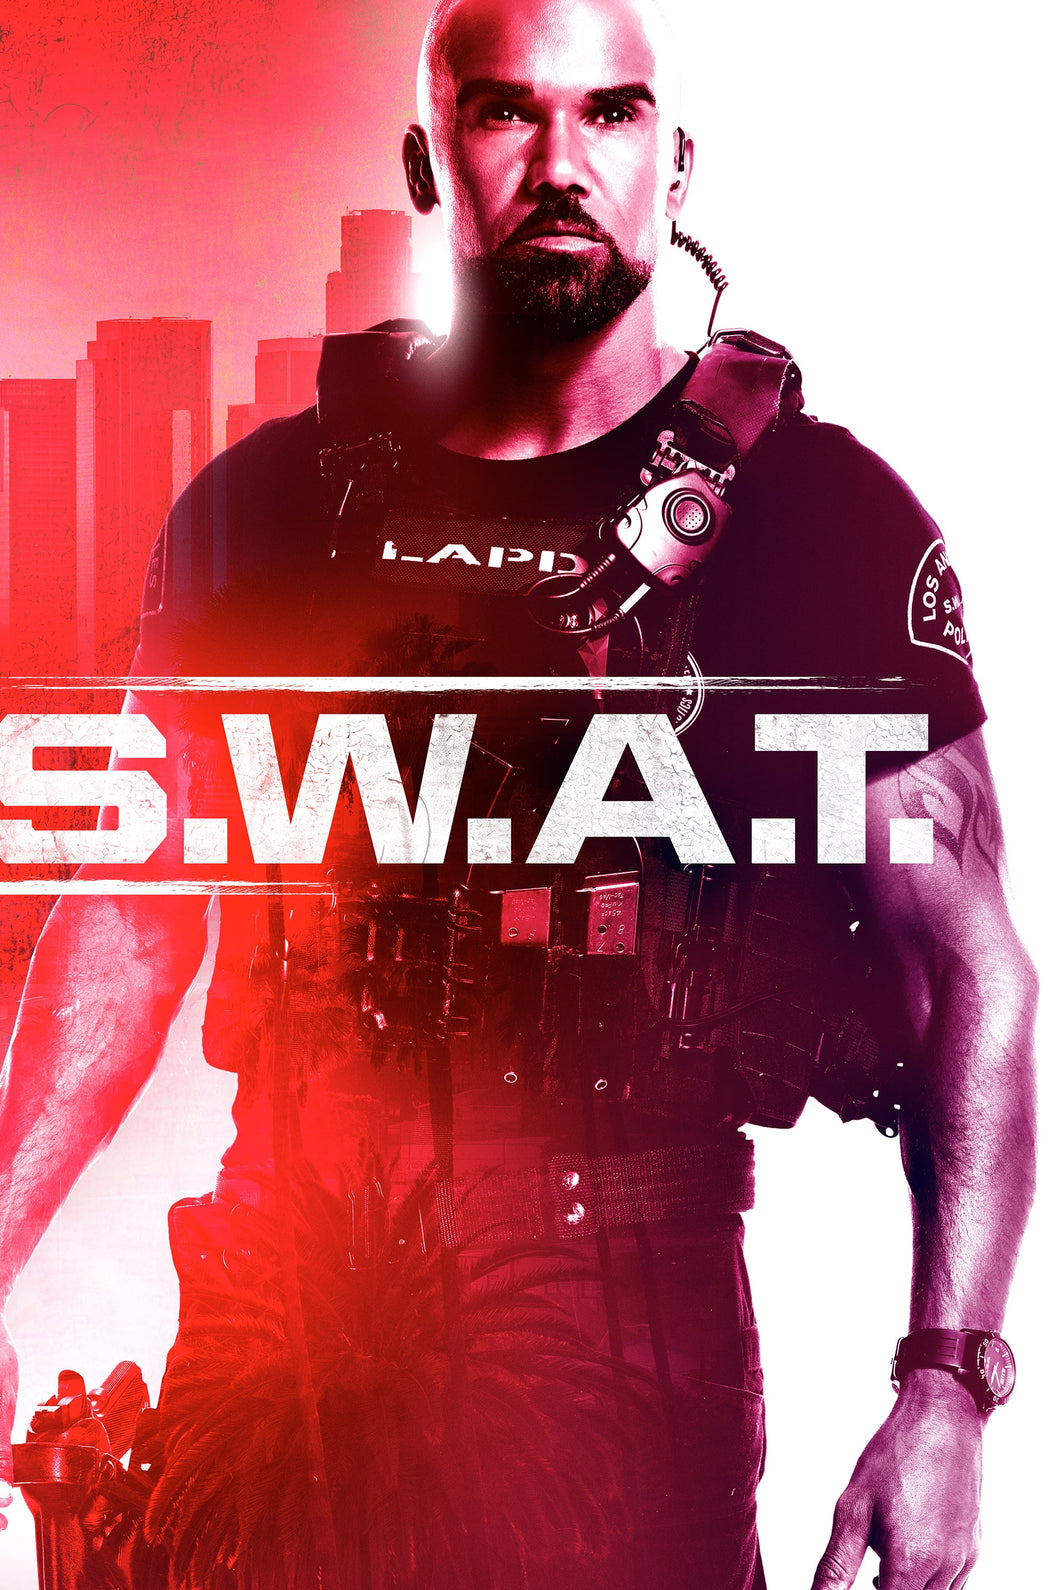 S.W.A.T. v2 TV Series High Quality Glossy Paper A1 A2 A3 A4 A3 Framed or Unframed!!!